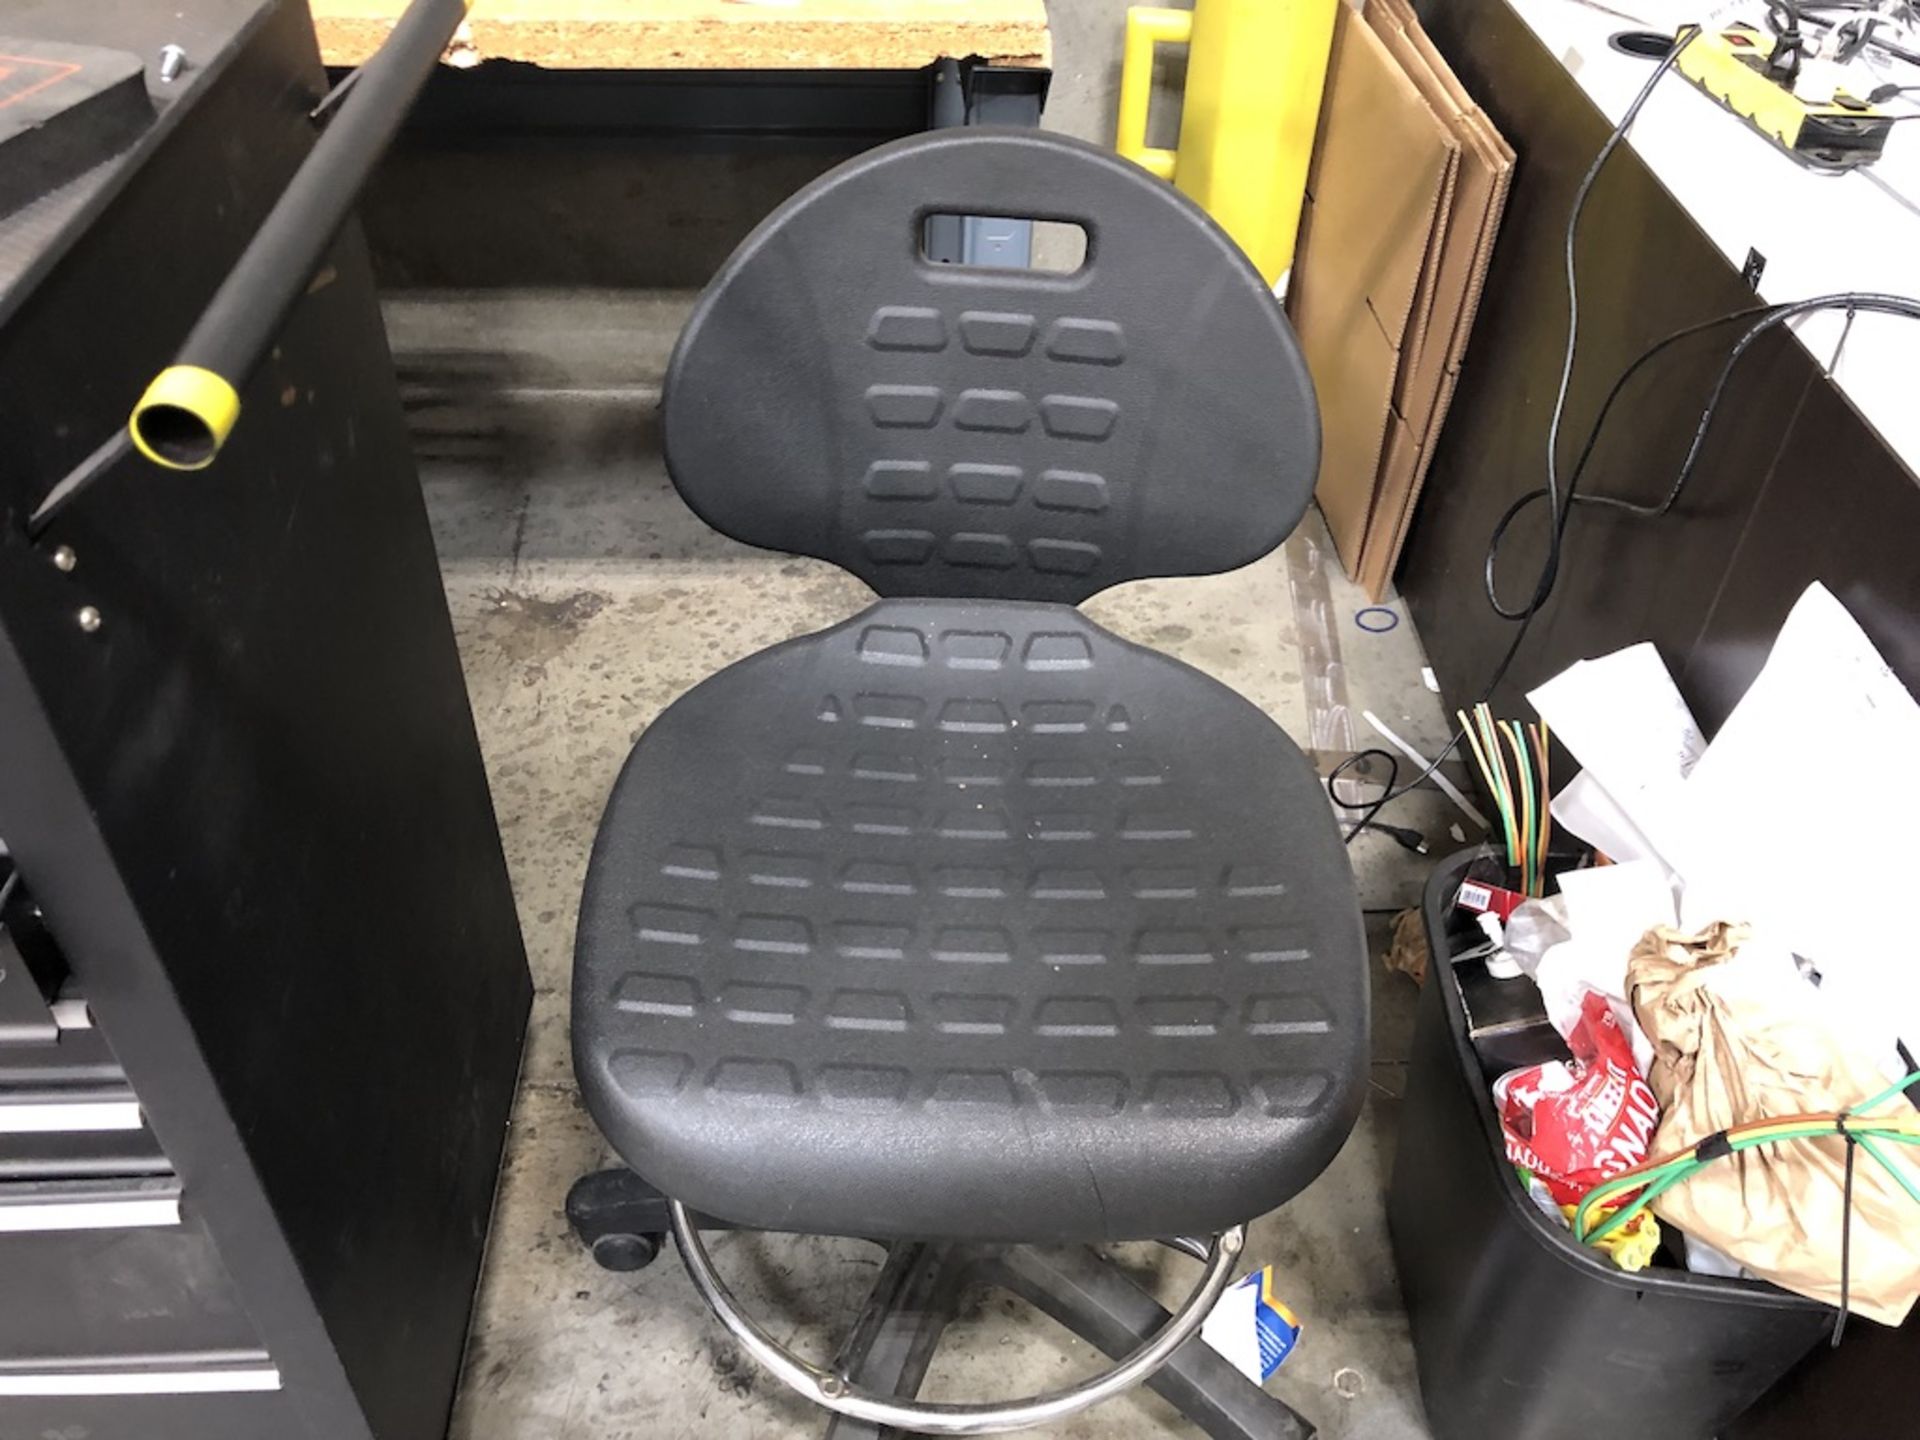 5 CASTER BLACK OFFICE CHAIR